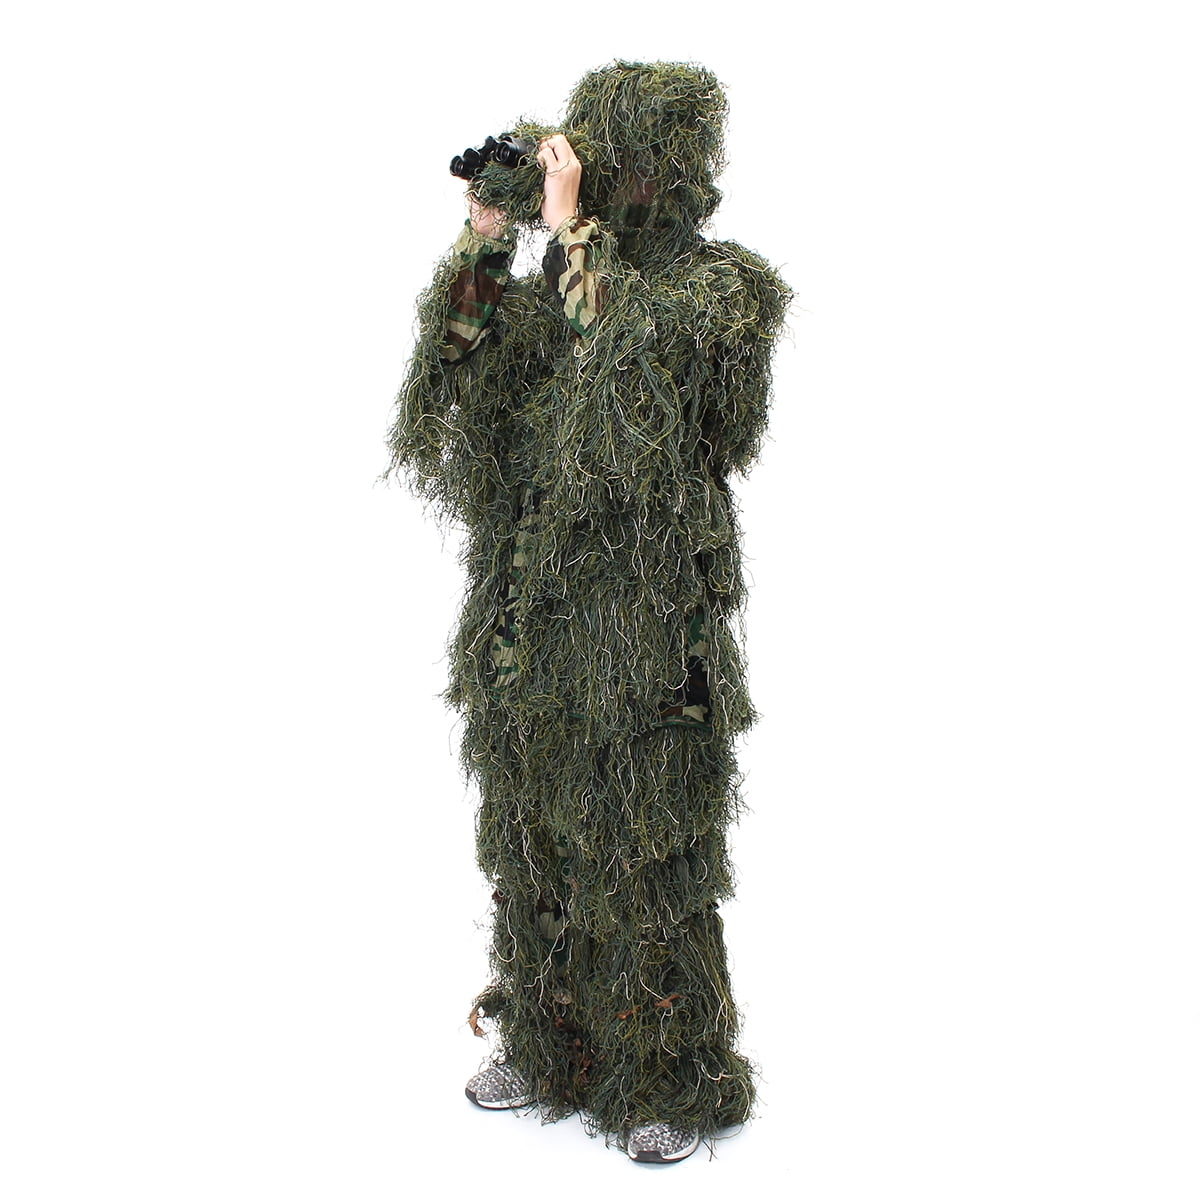 PHOTOGRAPHY CAMOUFLAGE UK SELLER GHILLIE SUIT CAMO BURLAP WOODLAND SHOOTING 